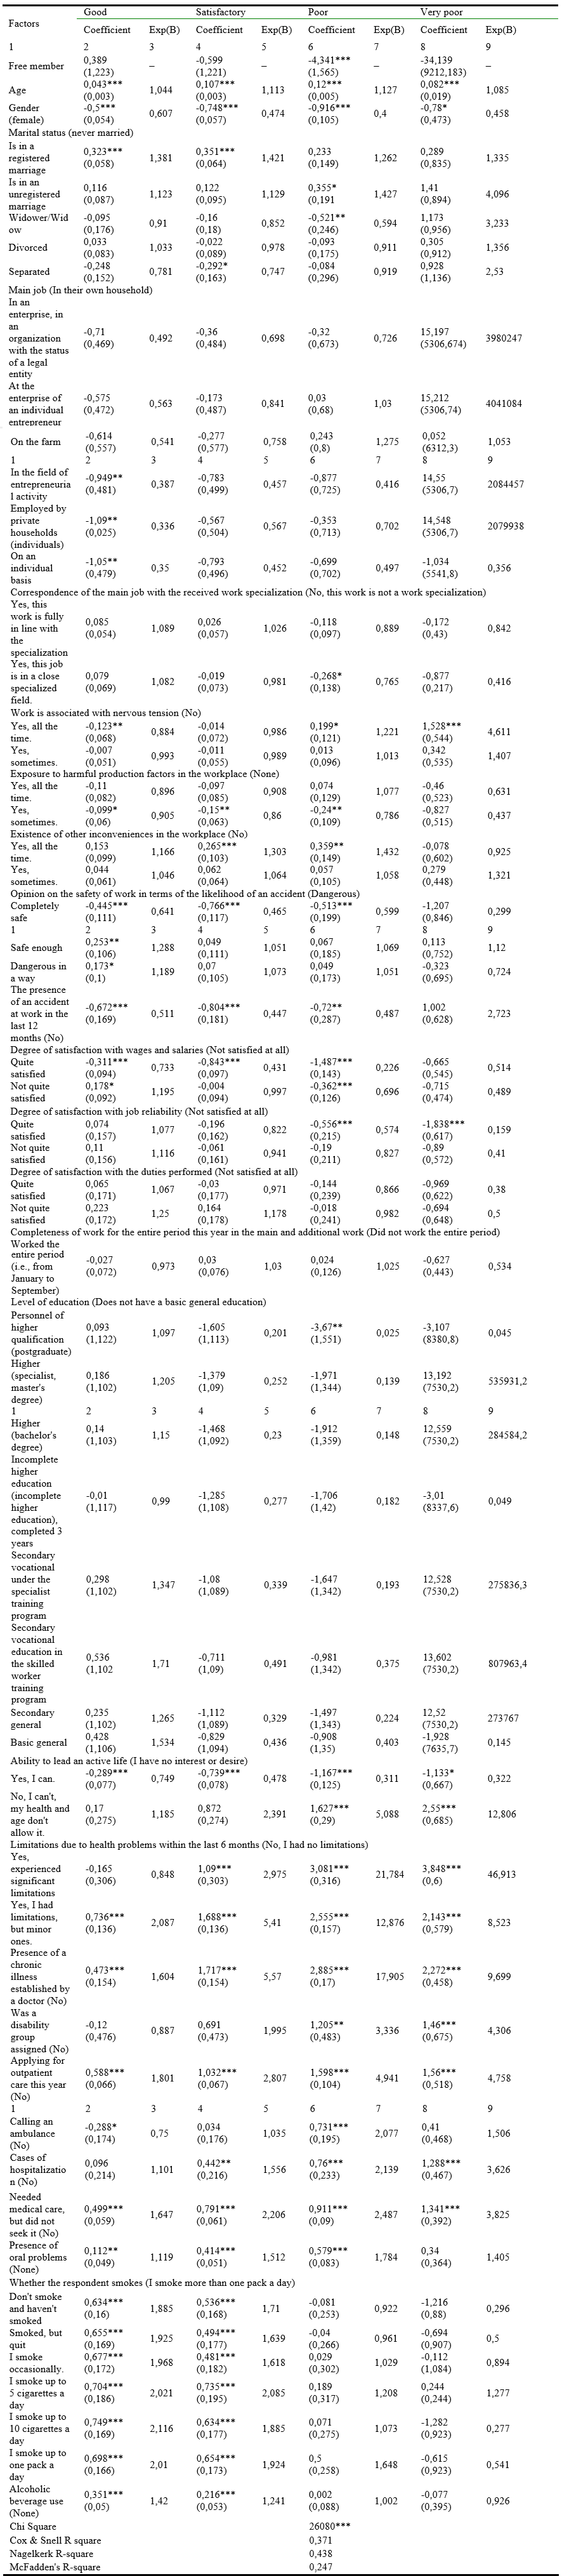 Results of multinomial regression model evaluation with the dependent variable subjective health assessment